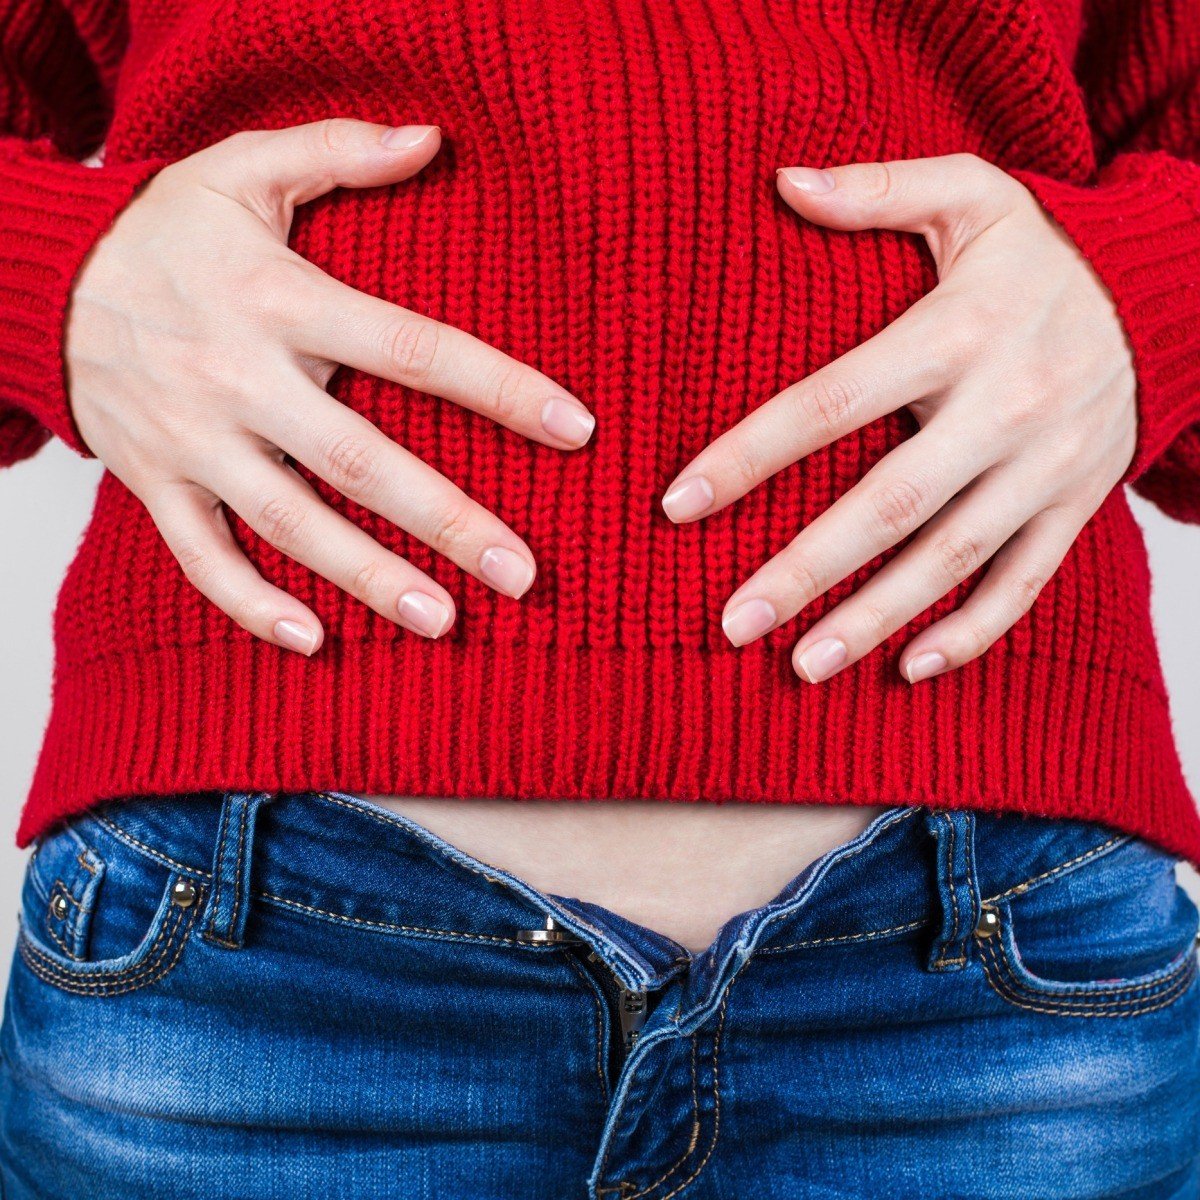 Remedies for Stomach Bloating?